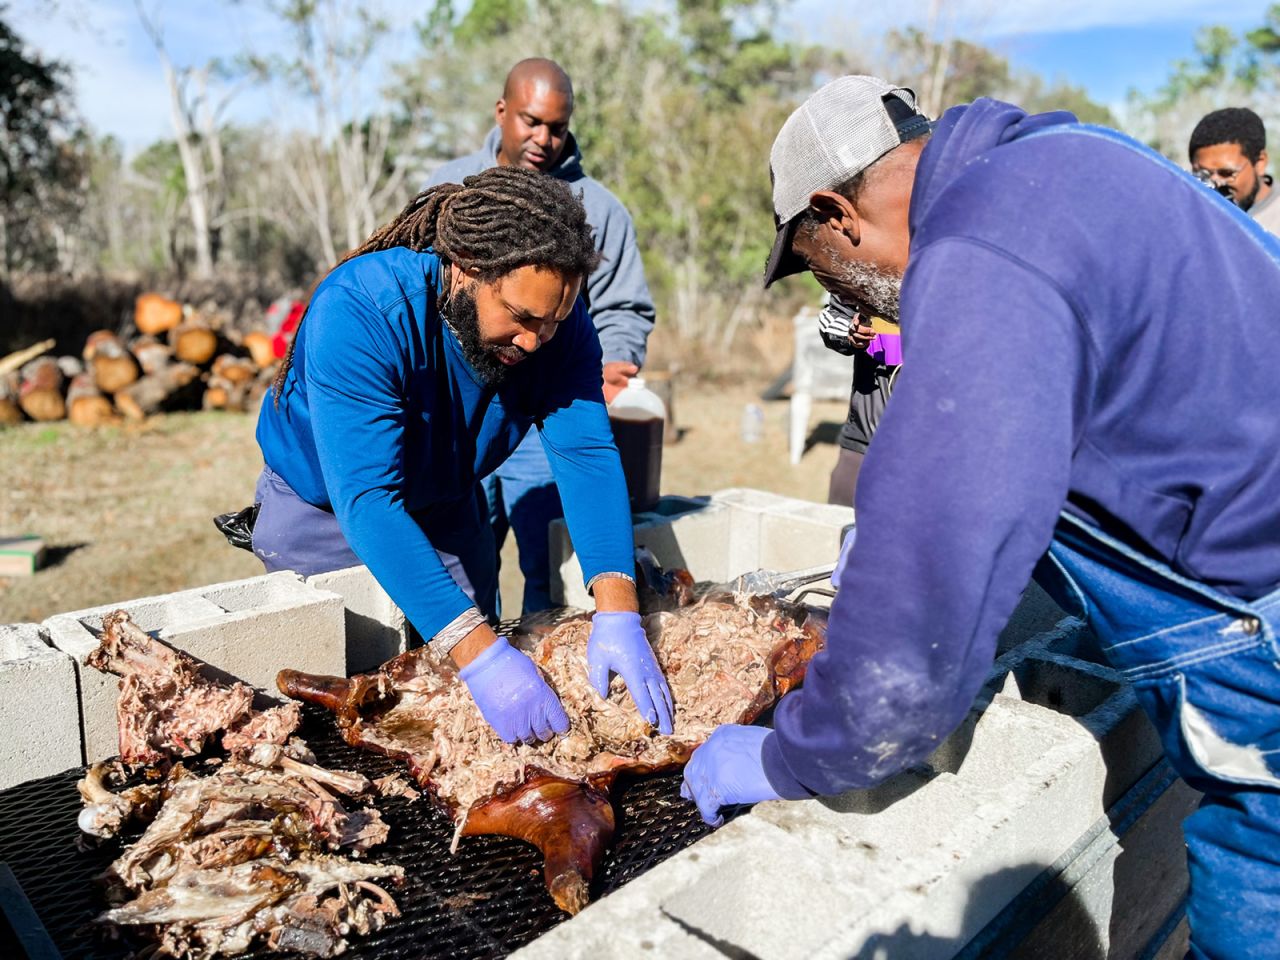 Marvin Ross (left) and Willis Spells pick meat from a roasted hog. Marvin has on blue shirt and his teacher, Spells, has on a cap and a purple sweatshirt with his back to the camera.